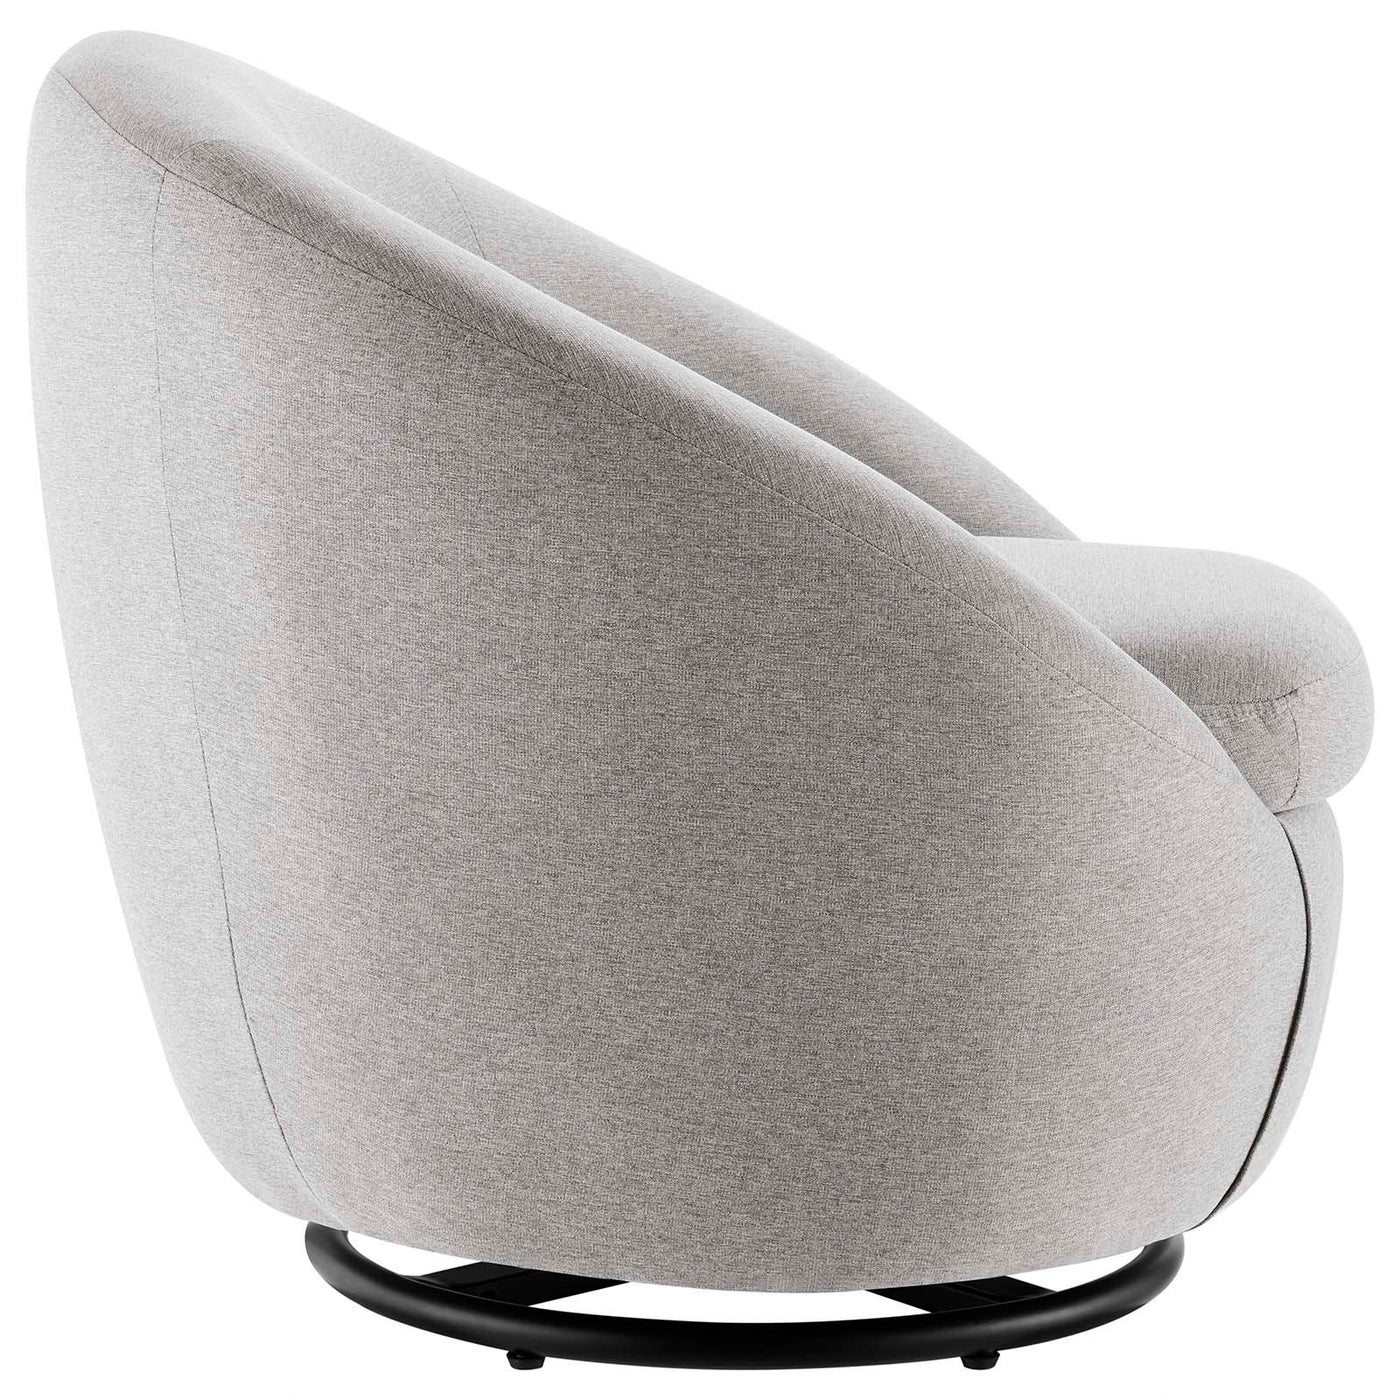 Buttercup Upholstered Fabric Swivel Chair